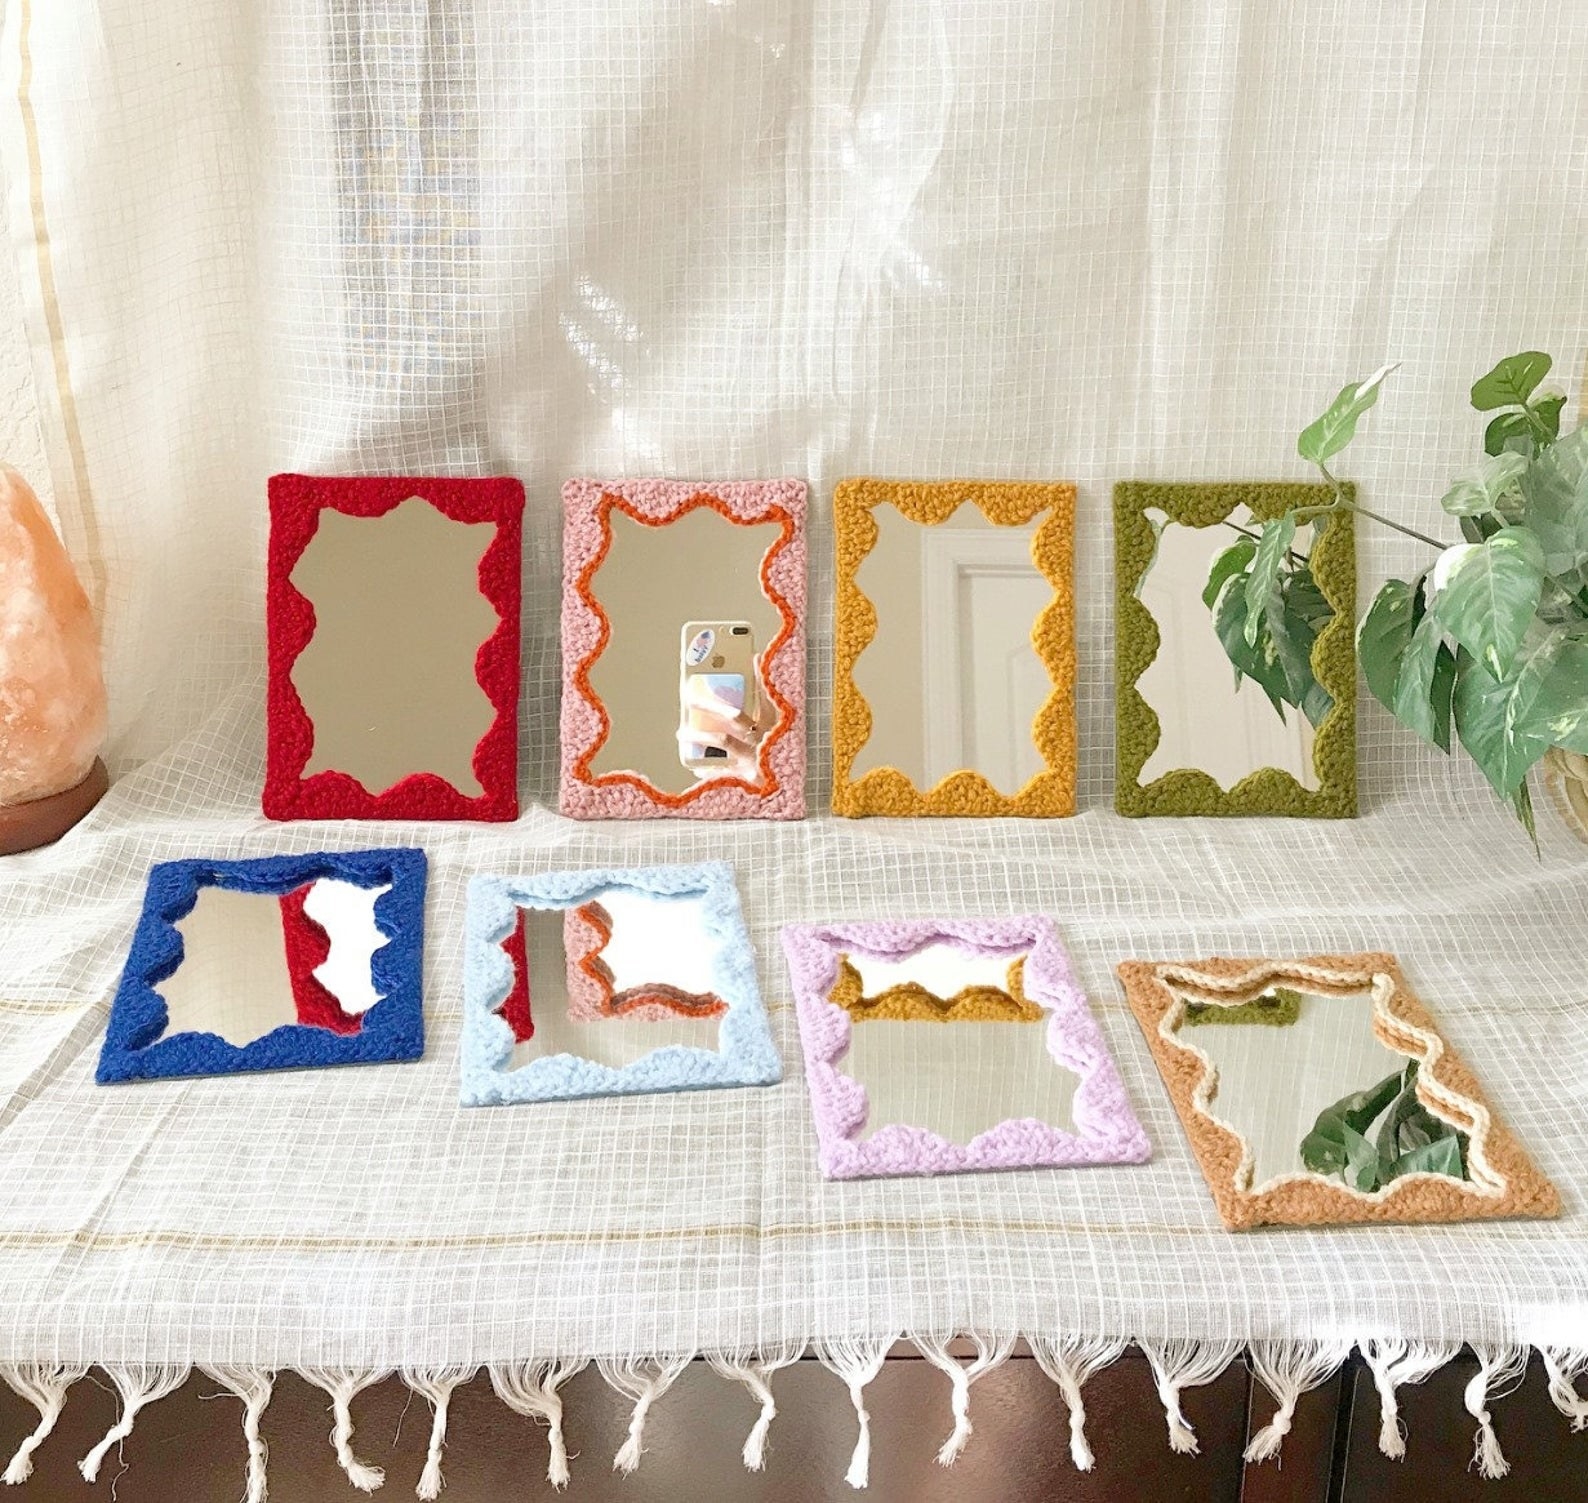 The rectangular small mirrors in red, pink, green, yellow, lavender, and more